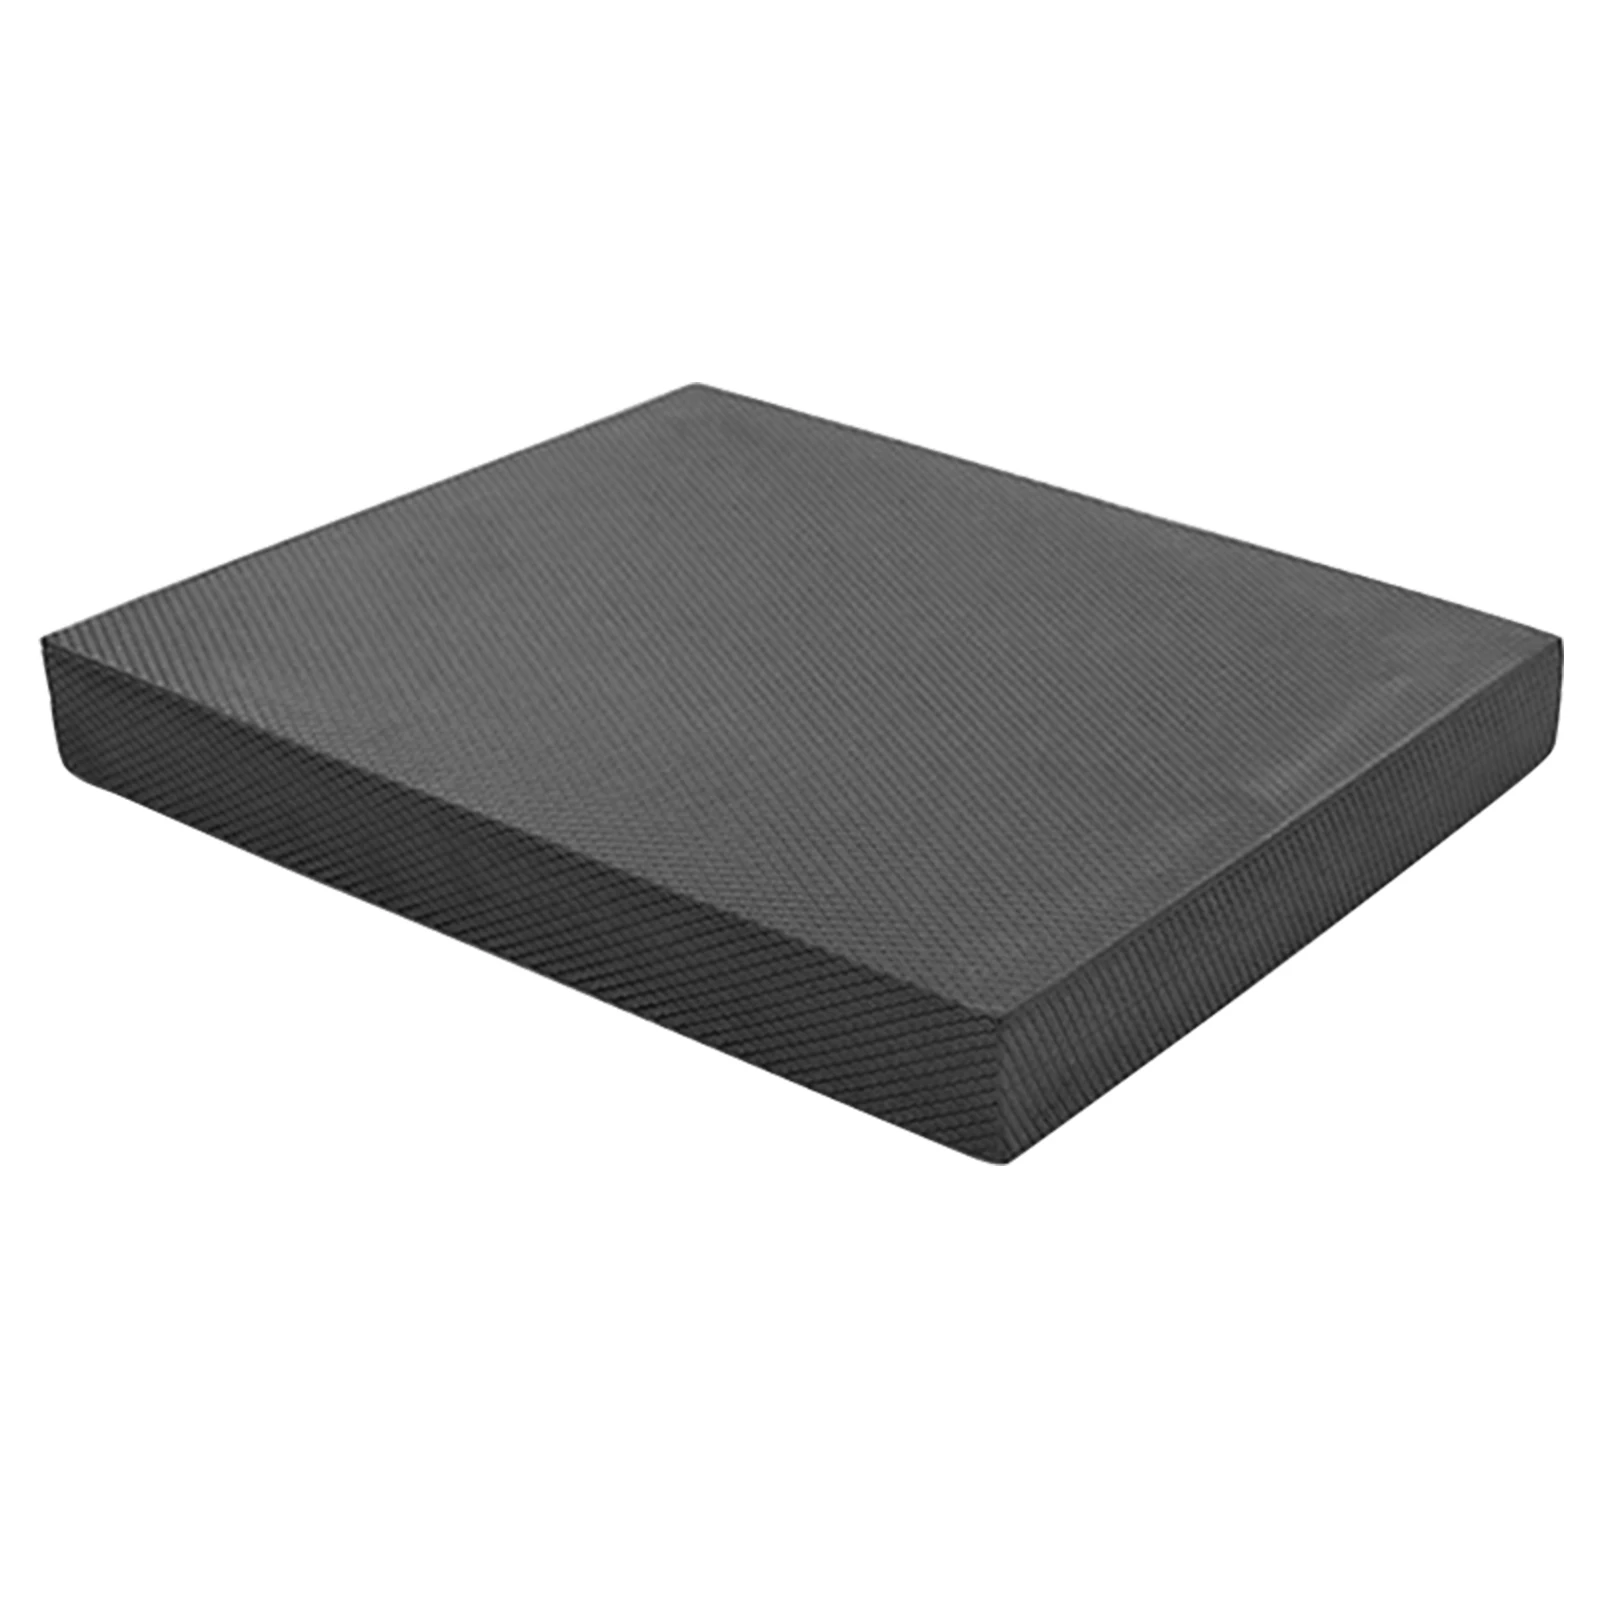 

Strength Training For Physical Therapy Exercise Mat Chair Cushion Ankle Yoga Gym Balance Foam Pad Adults Kids Fitness Soft TPE